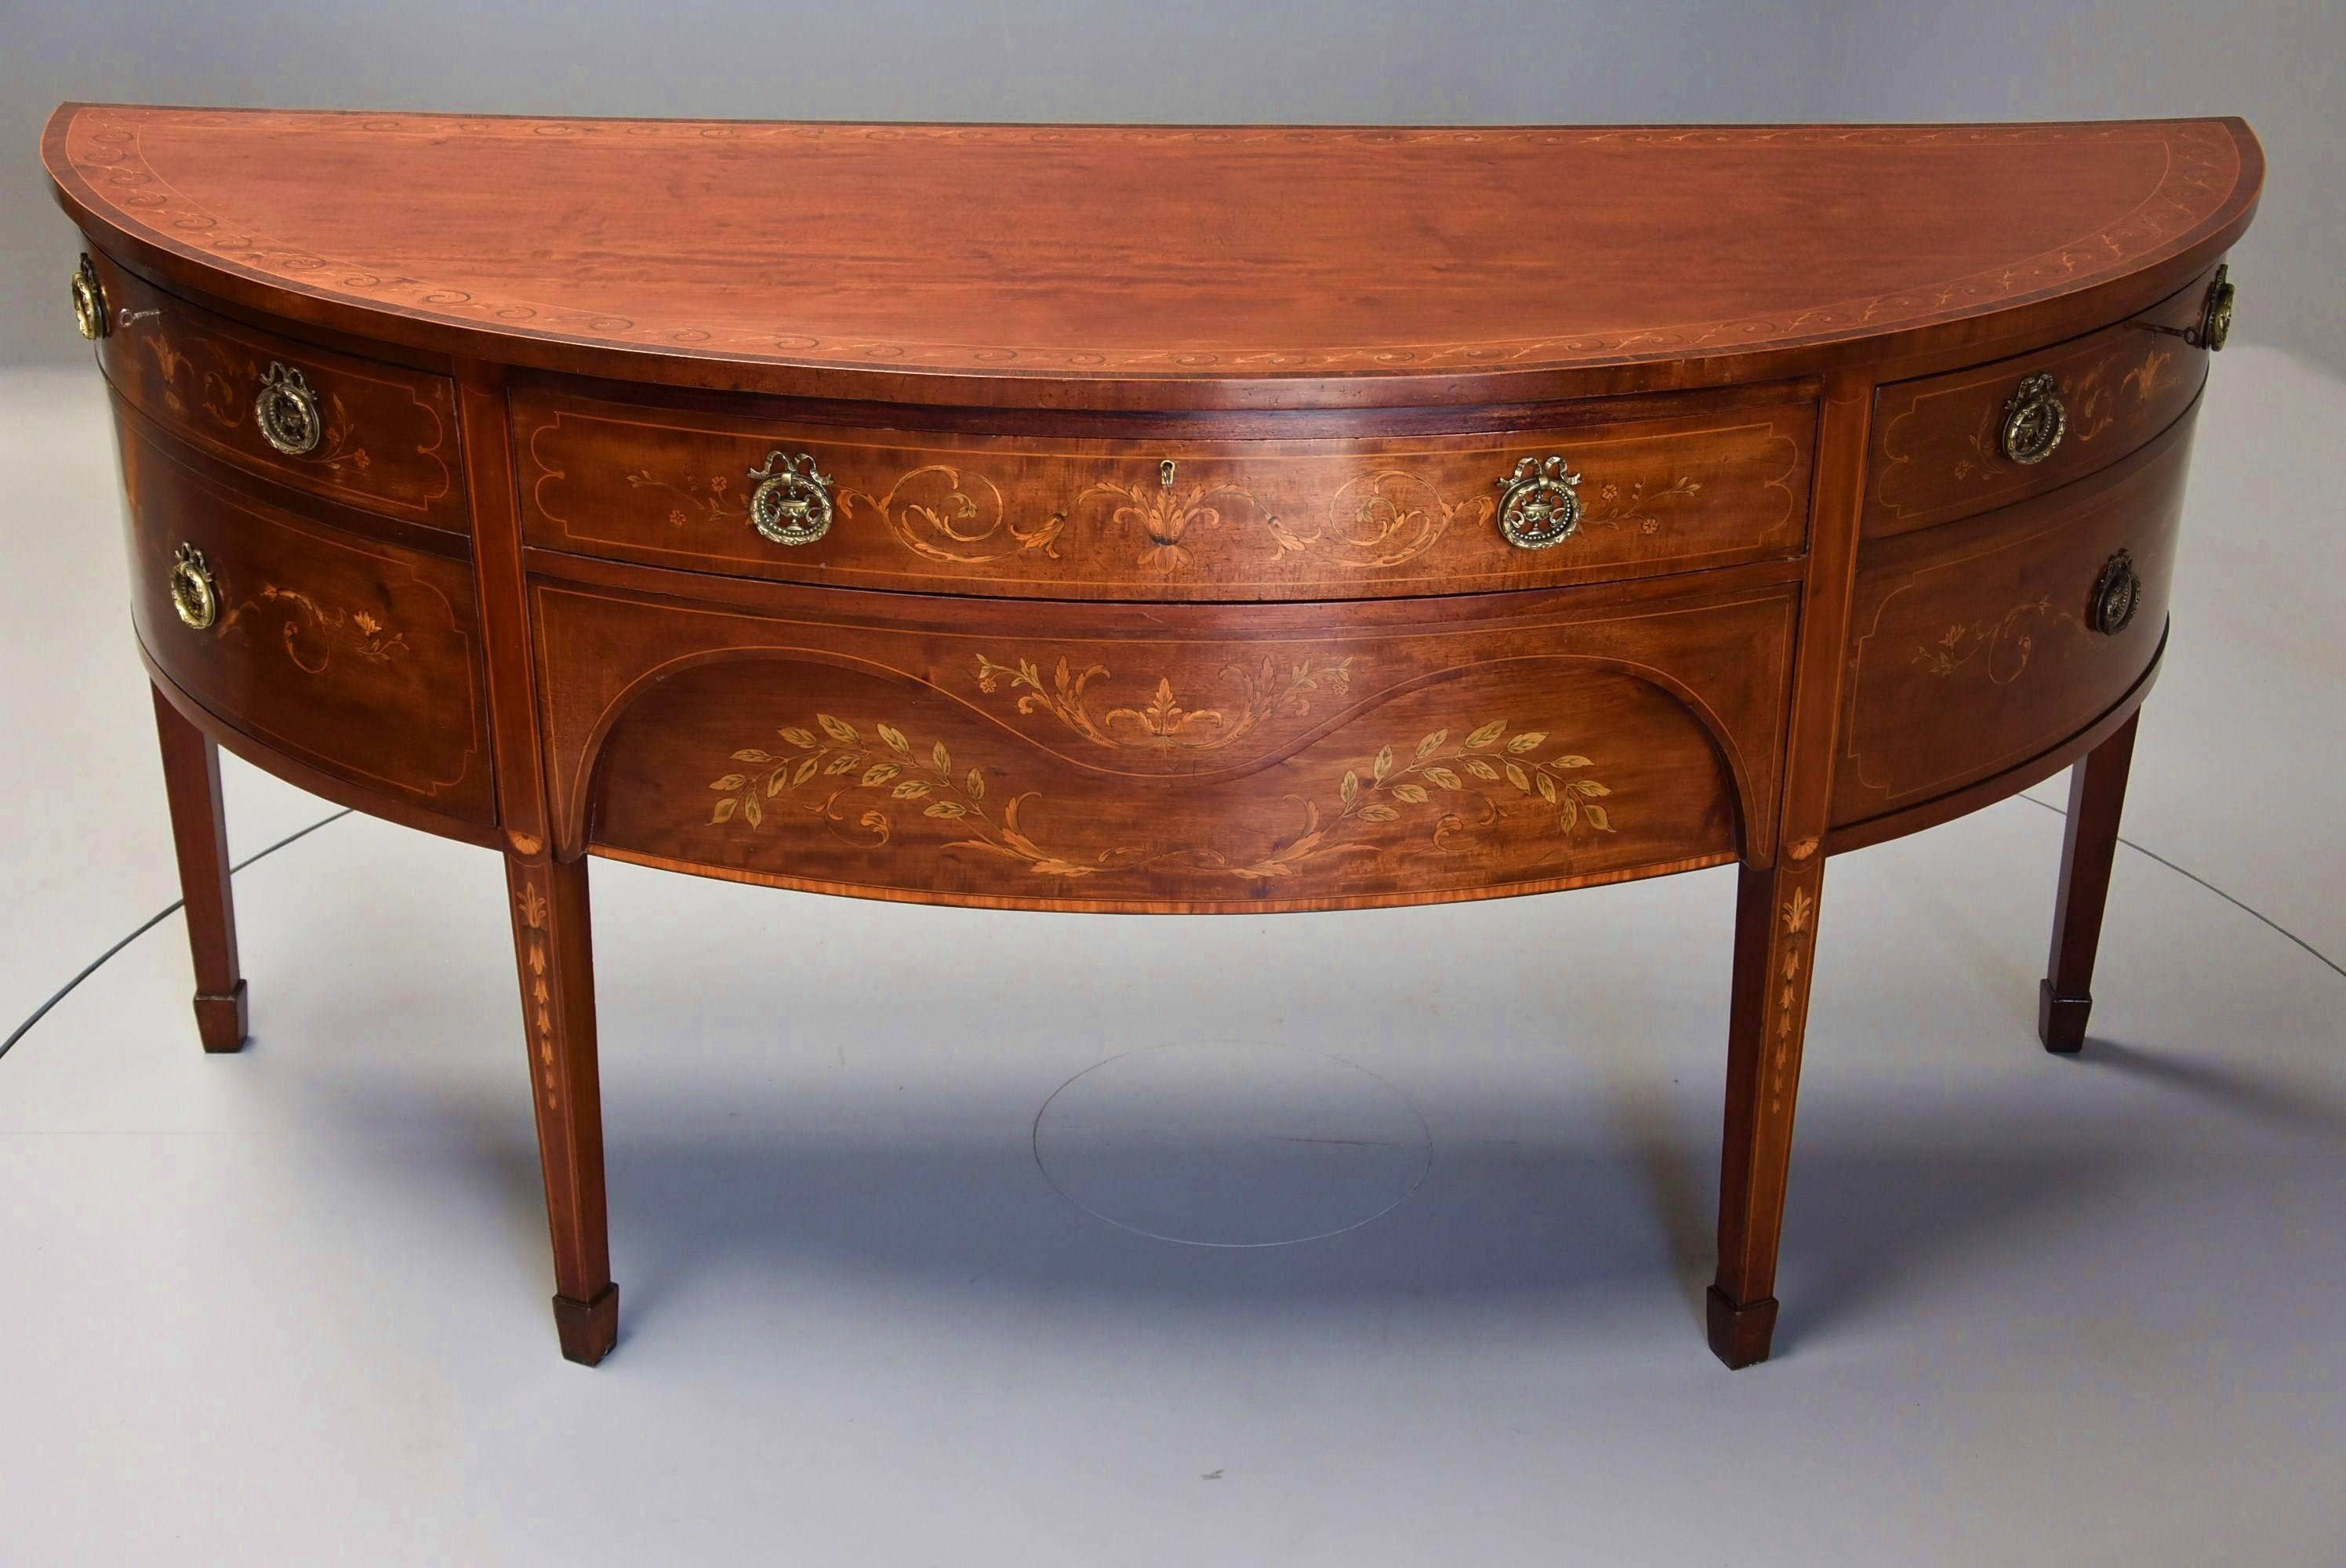 A fine quality and highly decorative Edwardian mahogany bow front sideboard with inlaid decoration by Druce & Co, London in the Sheraton style.

This sideboard consists of a mahogany  top, the central section of finely figured mahogany veneer